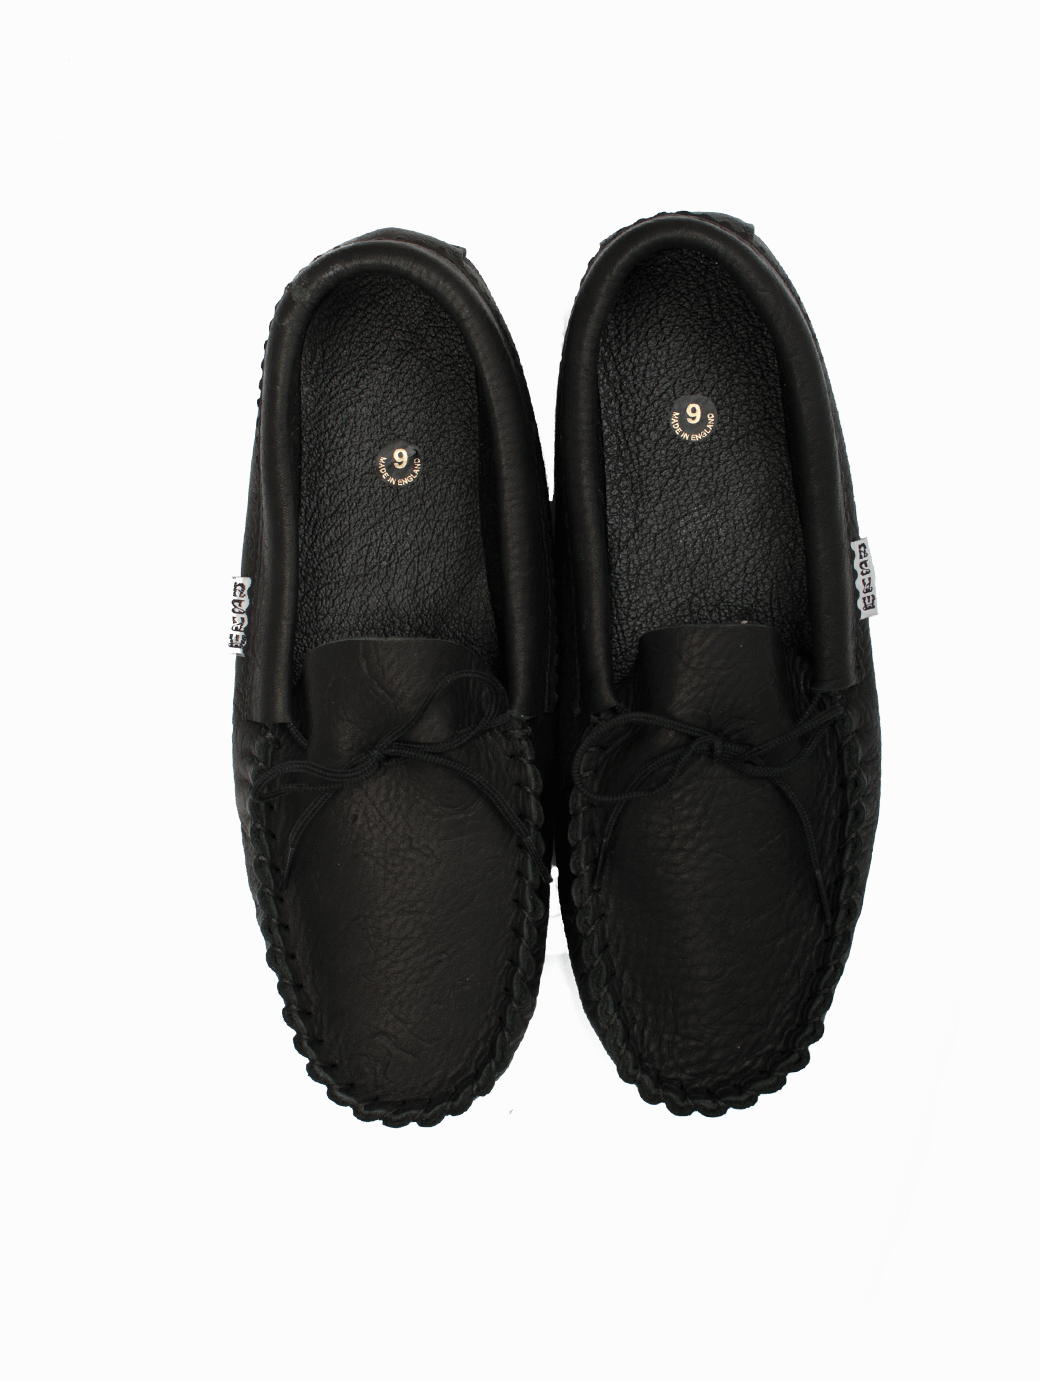 Real Leather Driving Moccasins | MABU Leathers